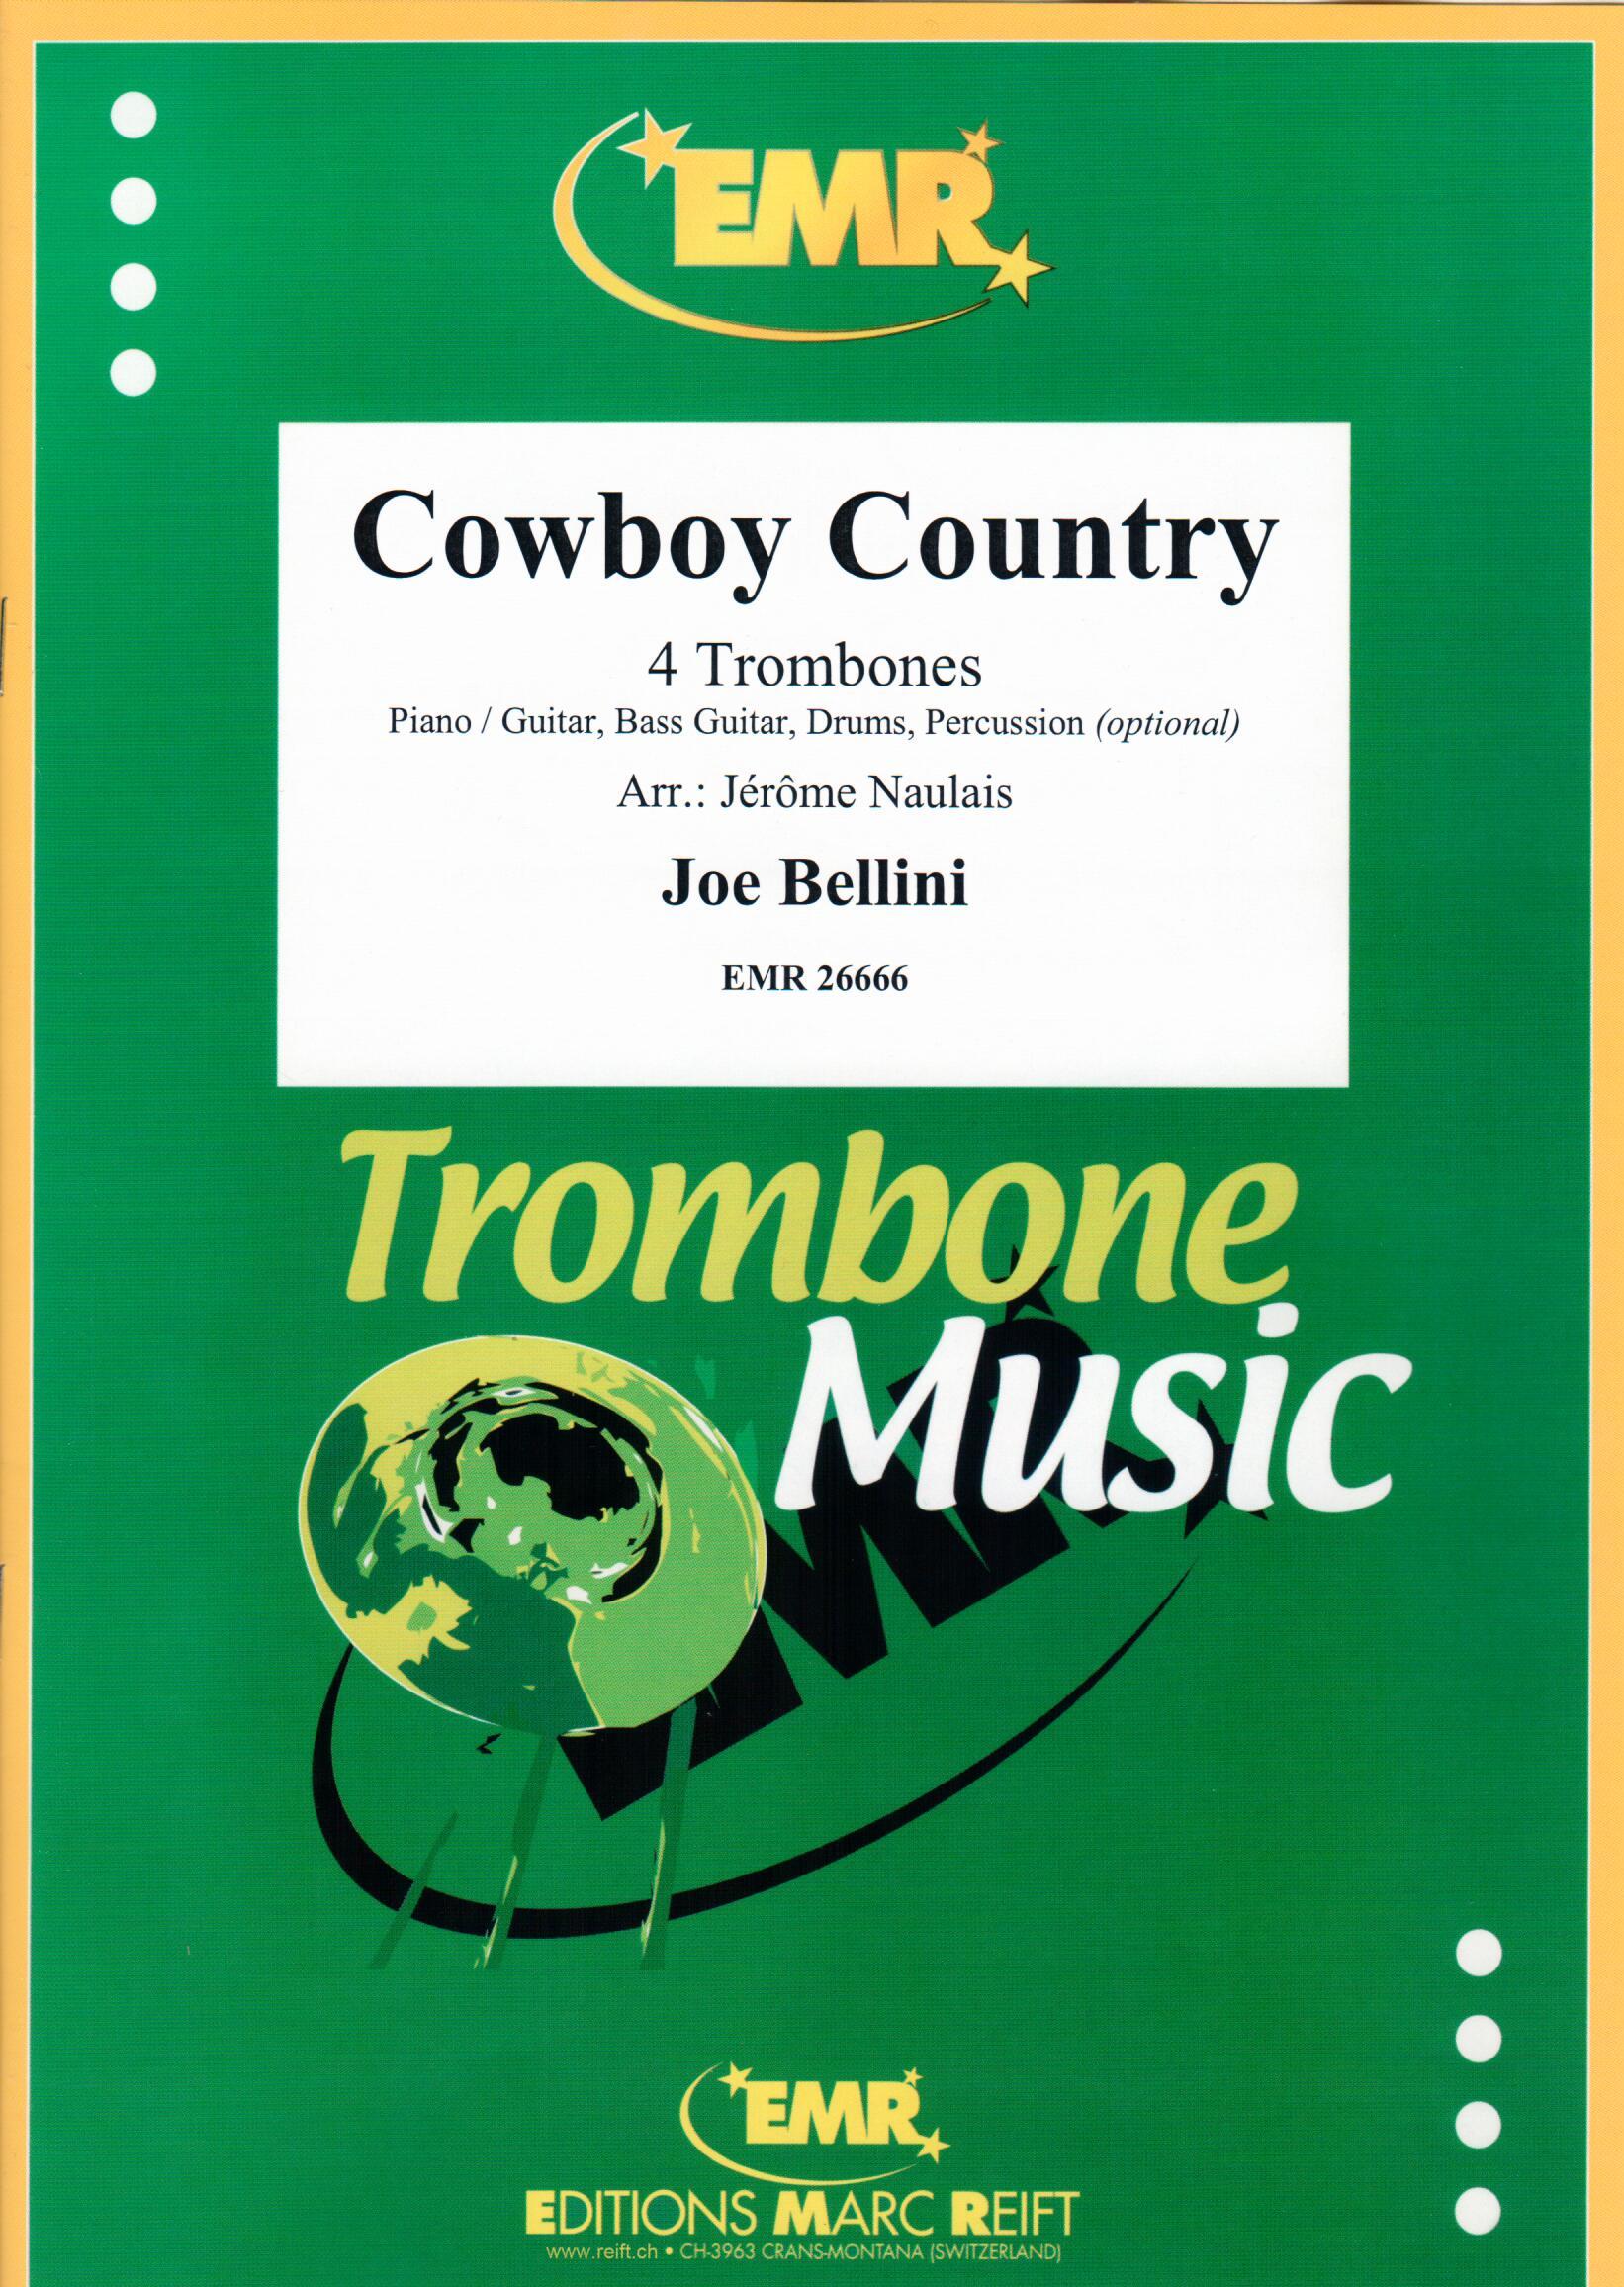 COWBOY COUNTRY, SOLOS - Trombone